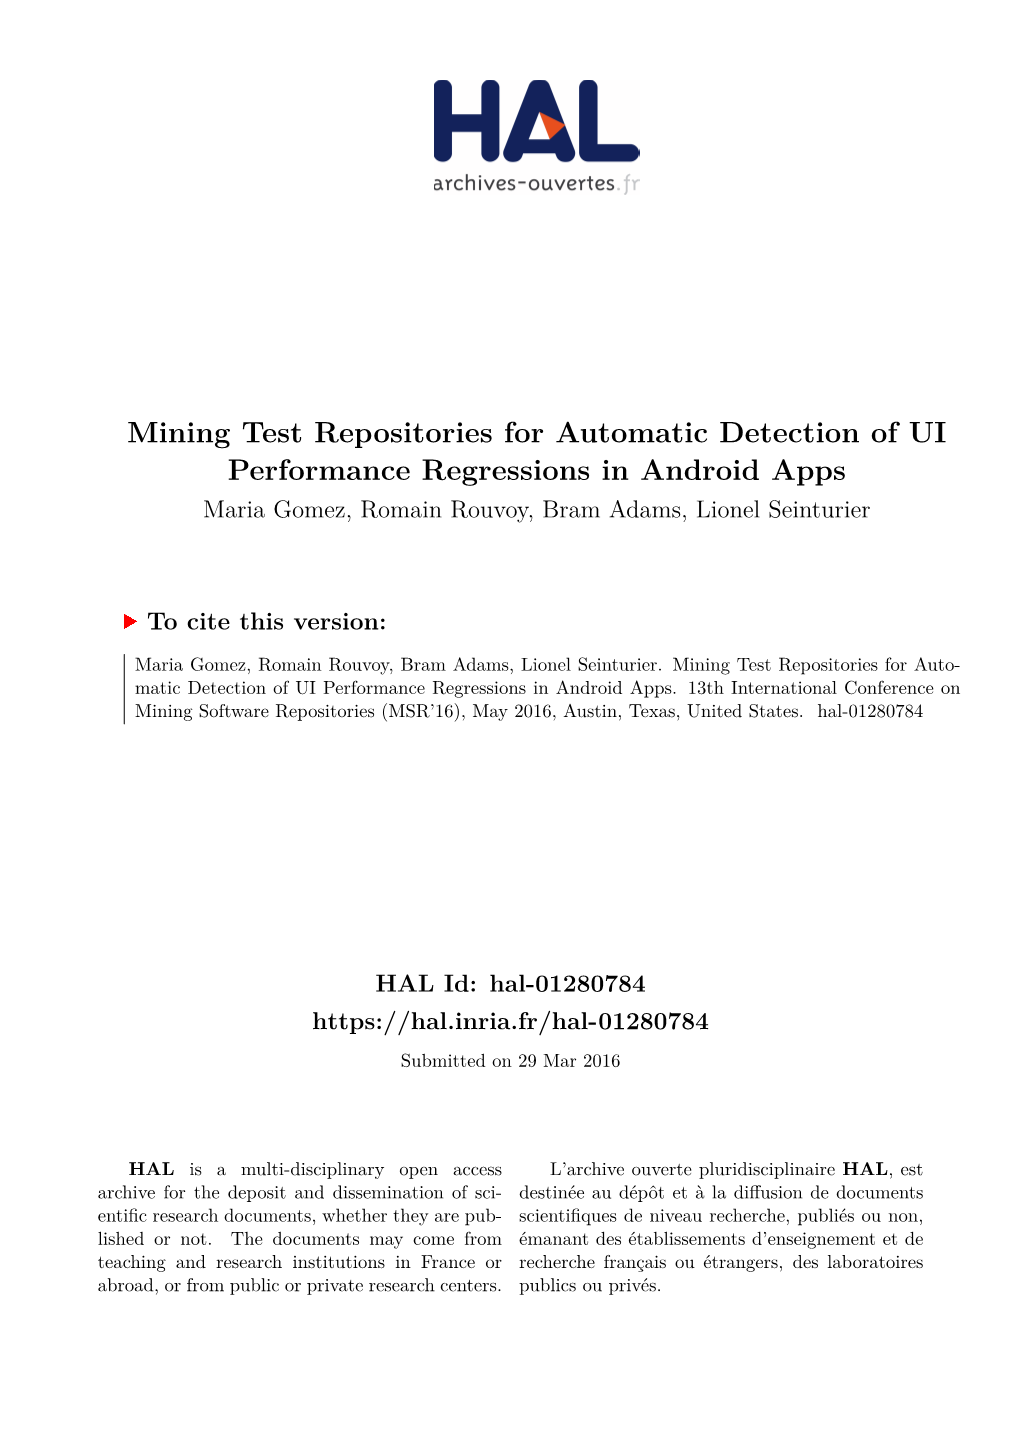 Mining Test Repositories for Automatic Detection of UI Performance Regressions in Android Apps Maria Gomez, Romain Rouvoy, Bram Adams, Lionel Seinturier